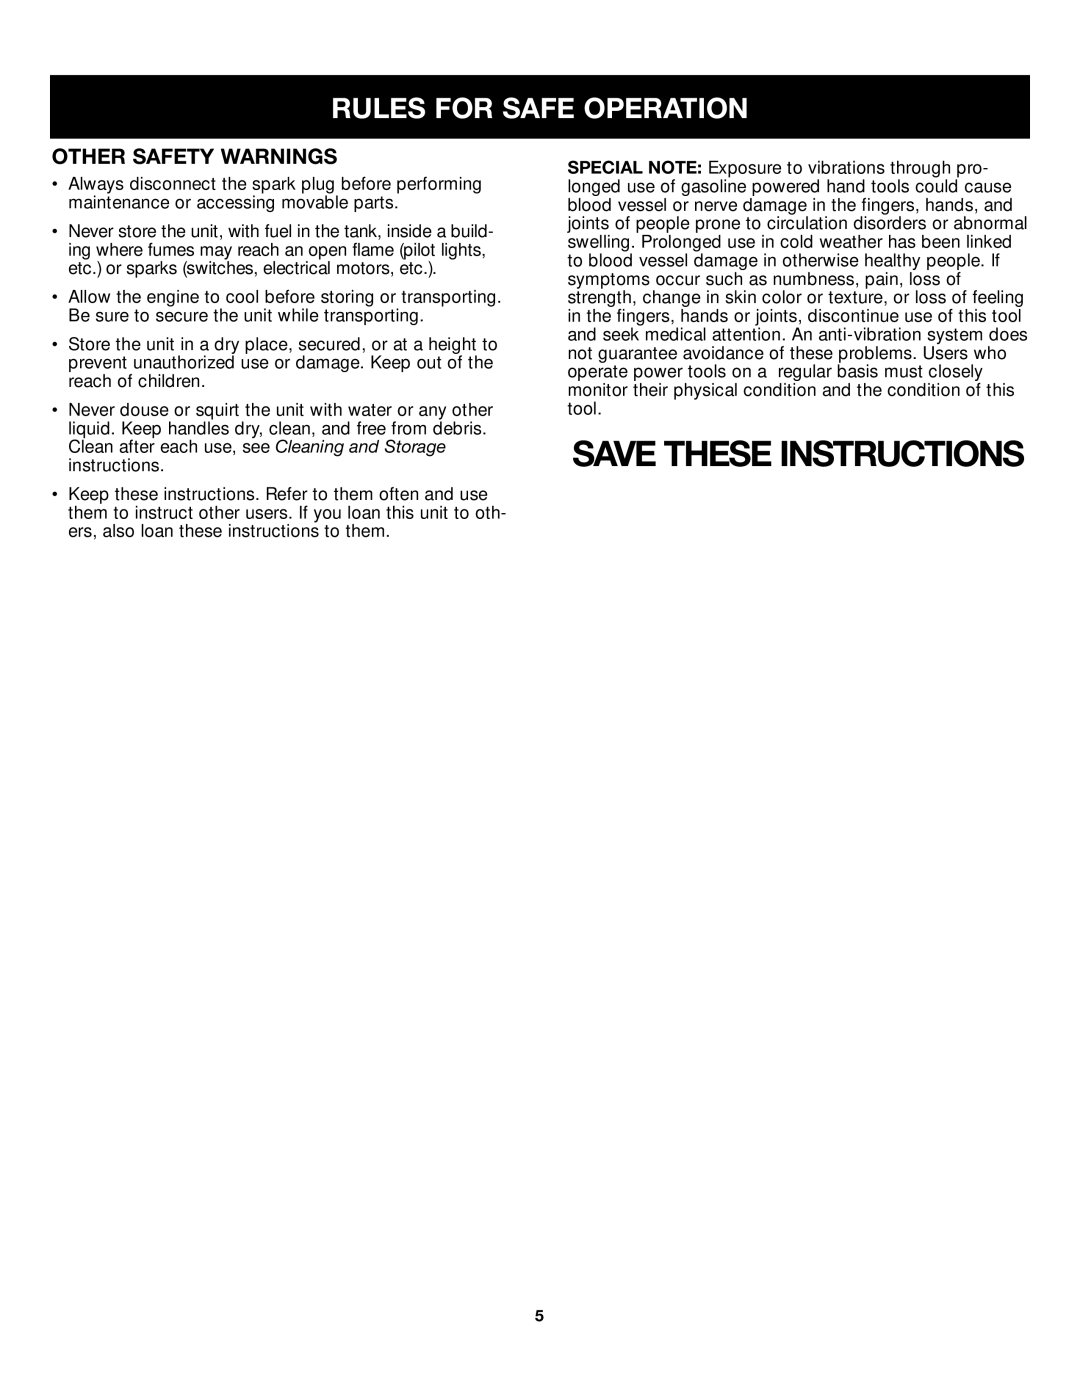 Craftsman 316.79499 manual Other Safety Warnings, Save These Instructions, Rules For Safe Operation 